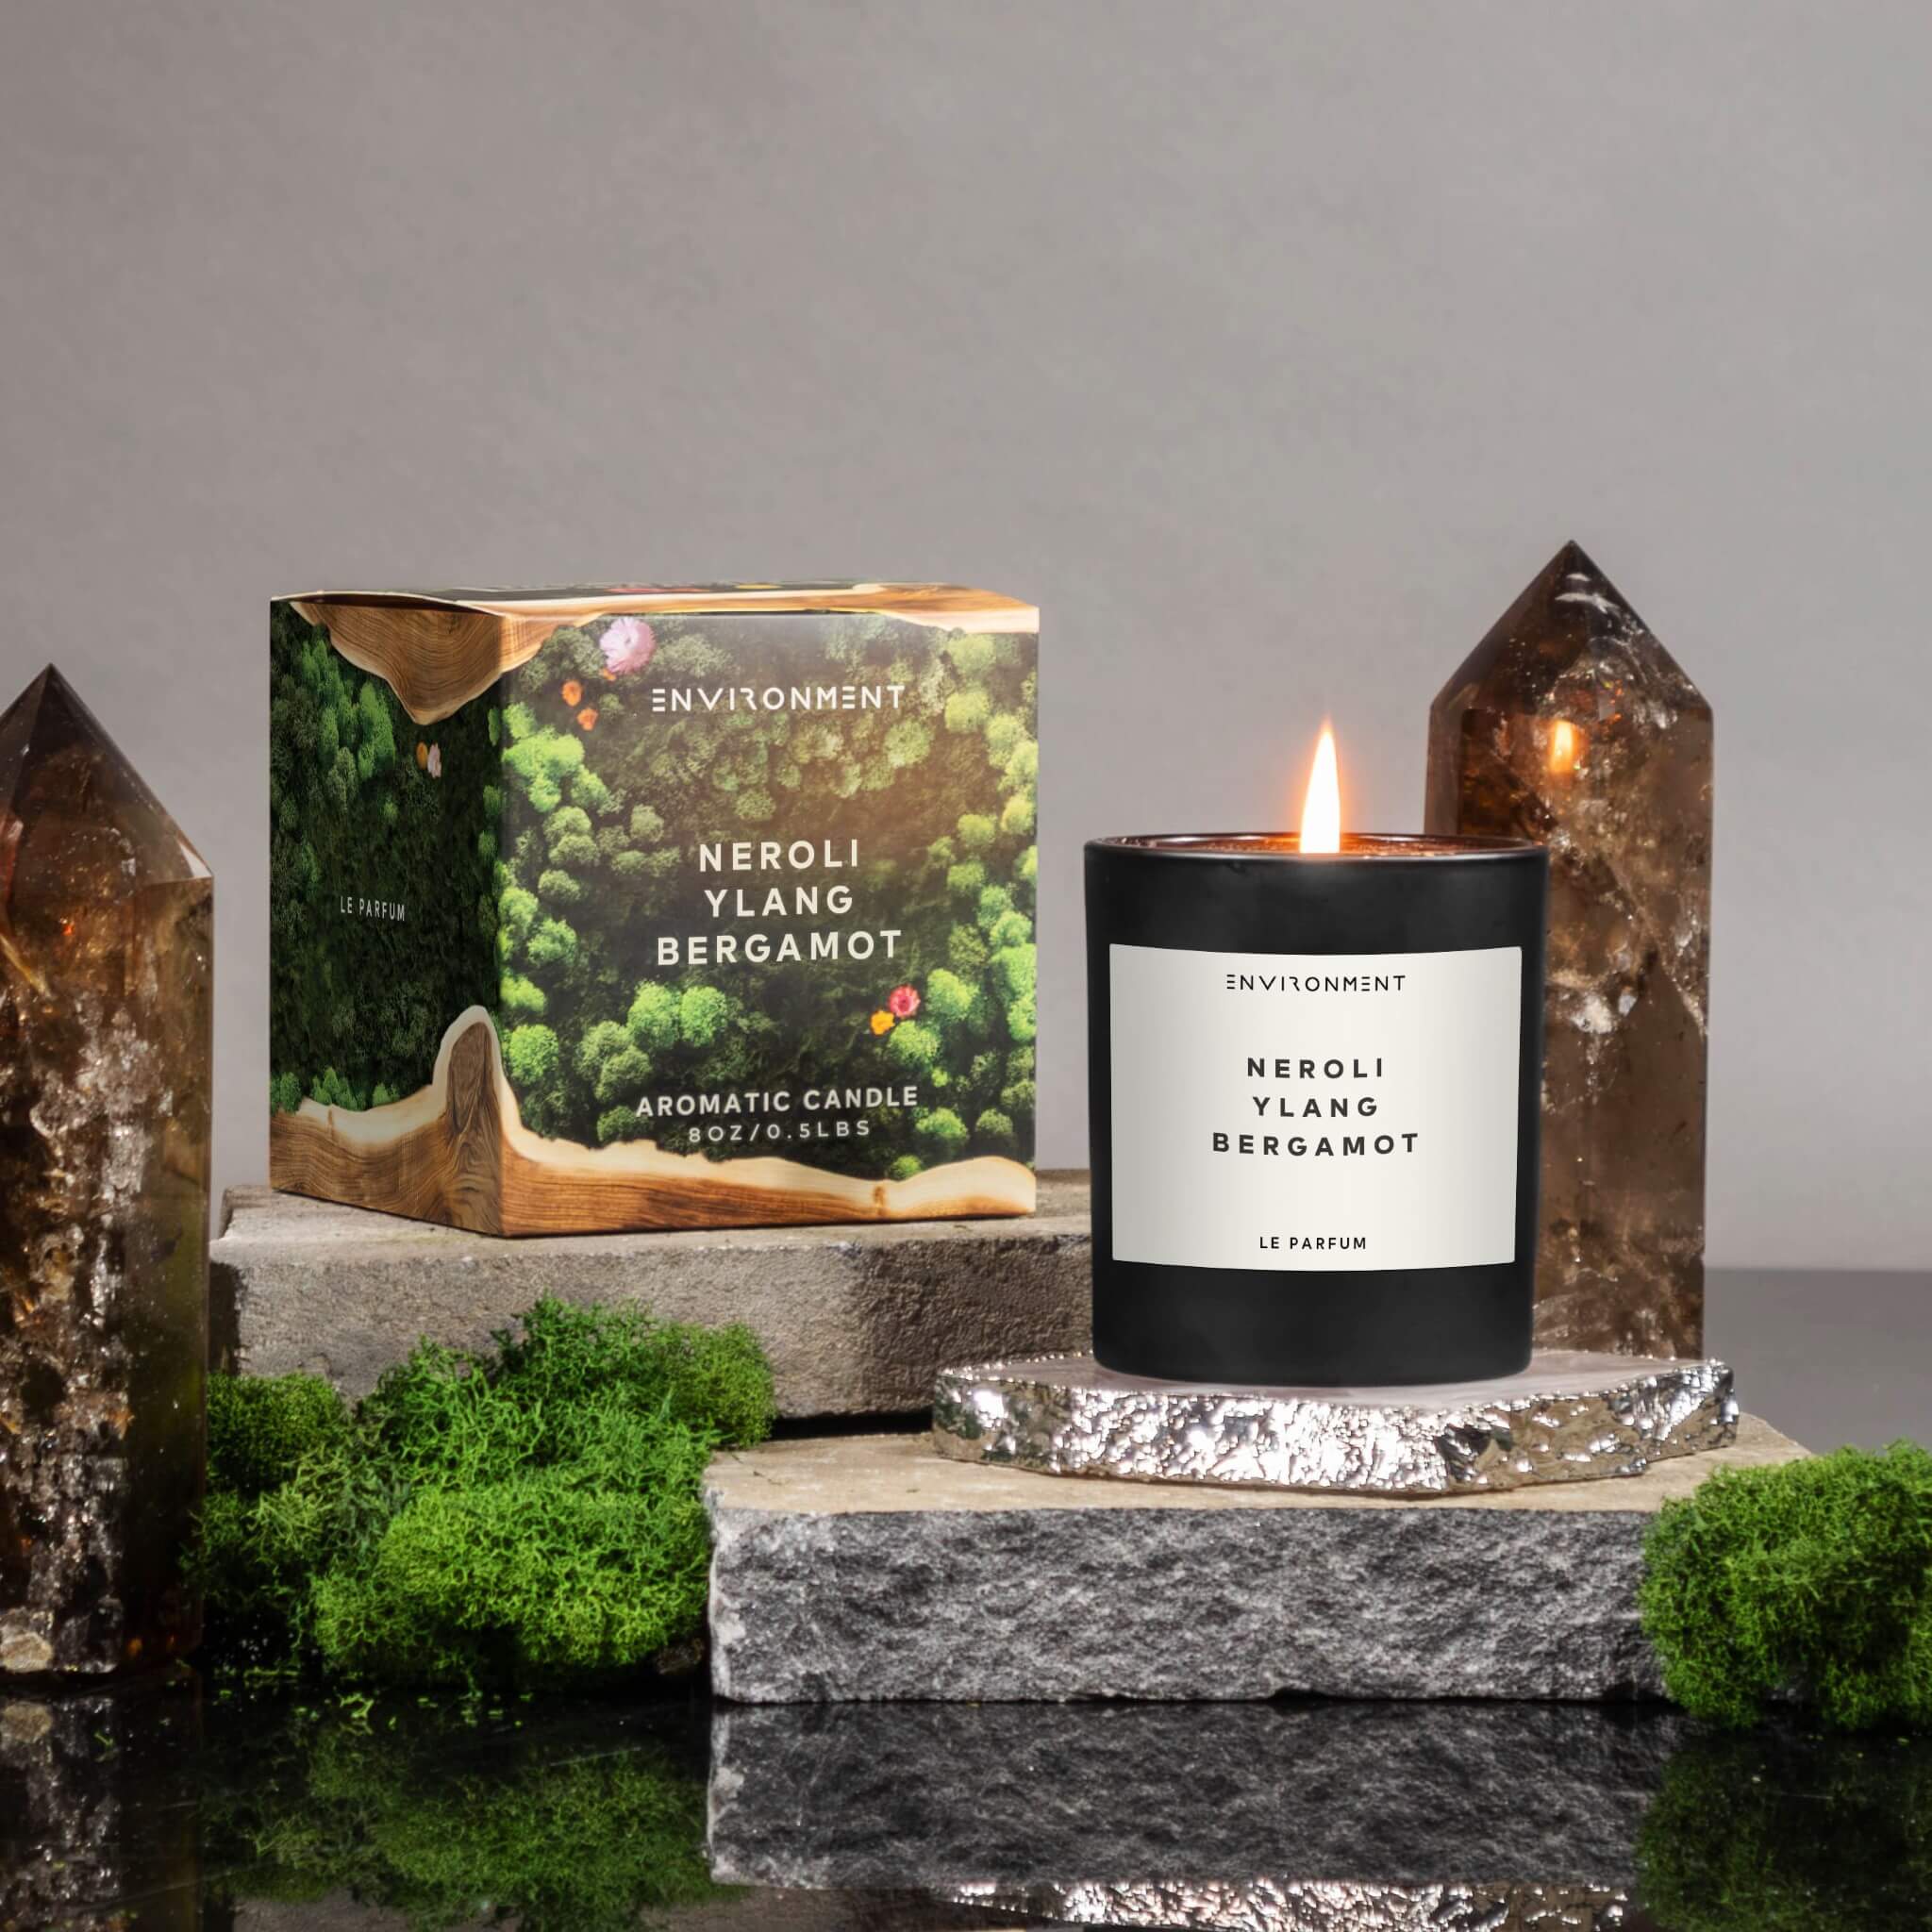 8oz Neroli | Ylang | Bergamot Candle with Lid and Box (Inspired by Chanel Chanel #5®)